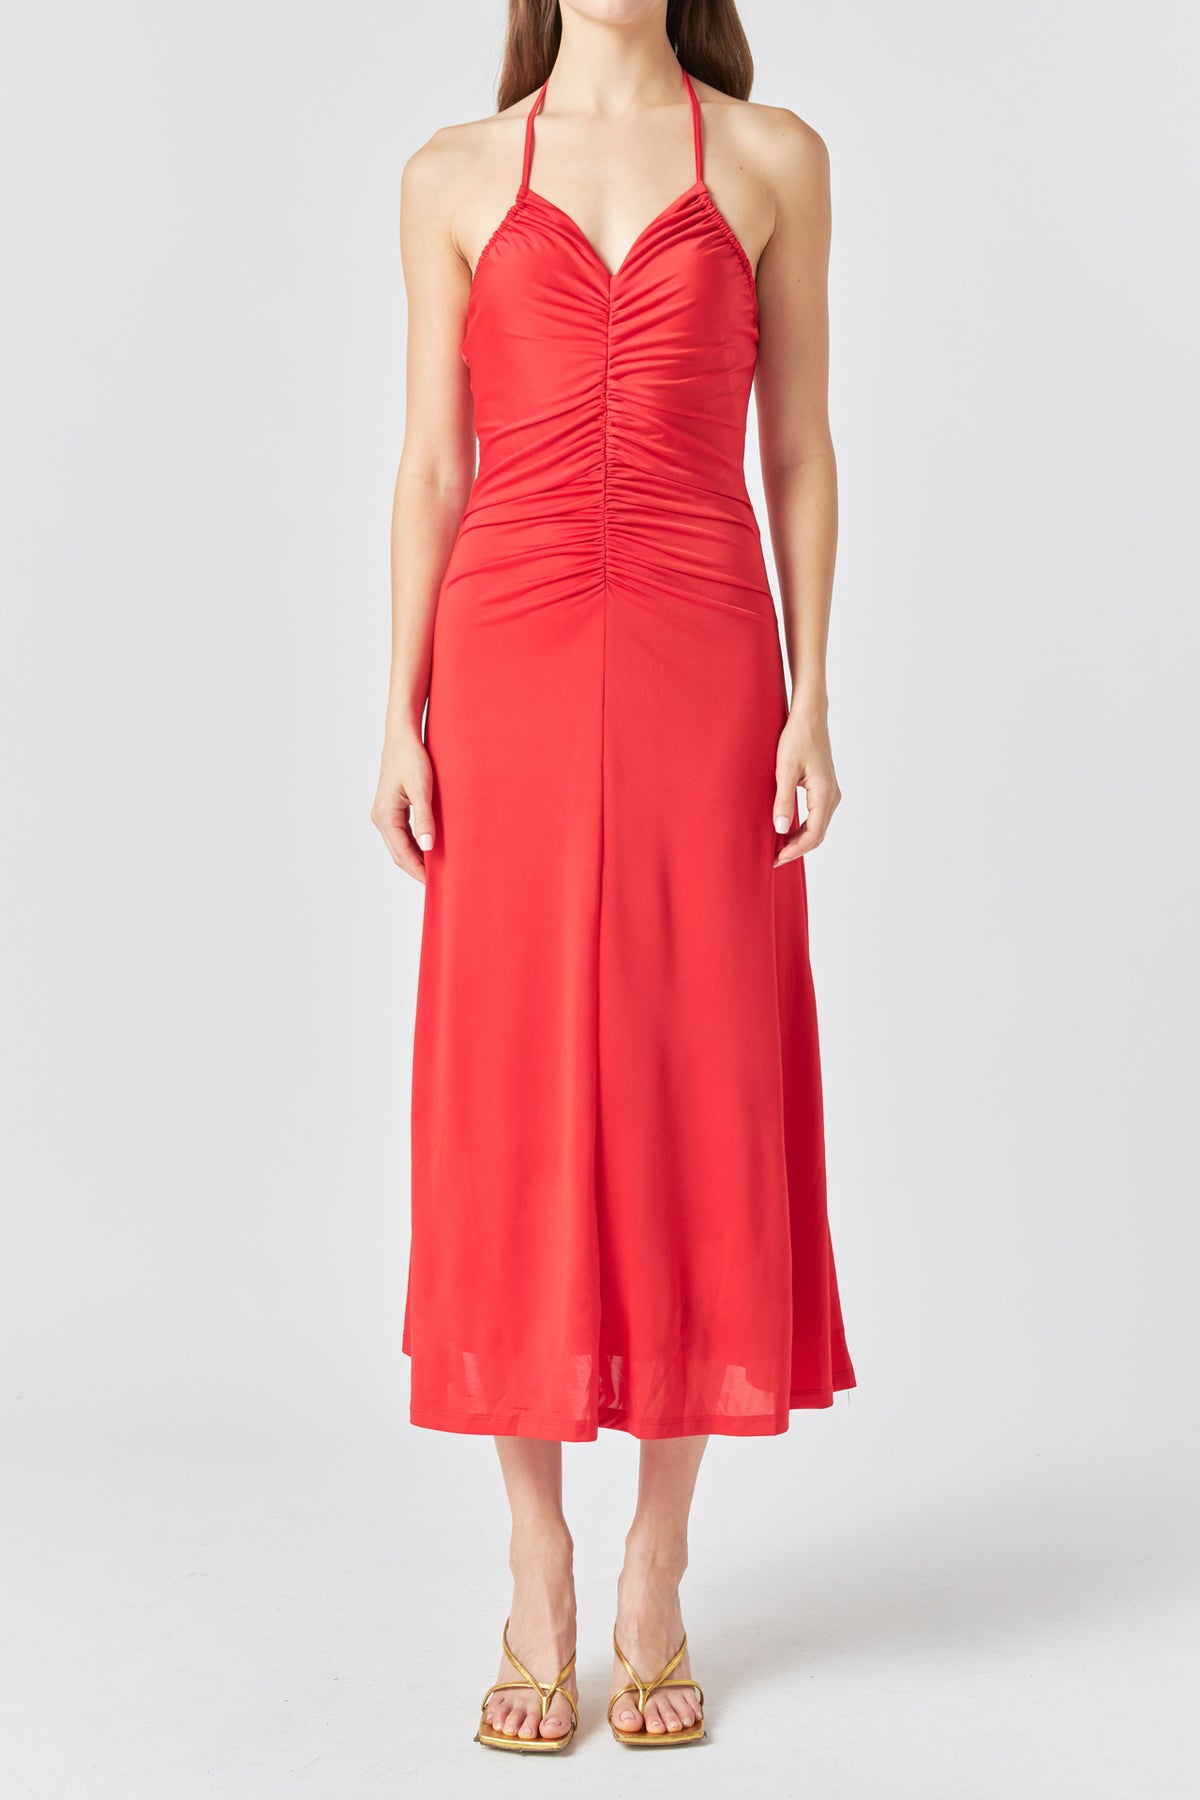 ENDLESS ROSE - Halter Ruched Maxi Dress - DRESSES available at Objectrare